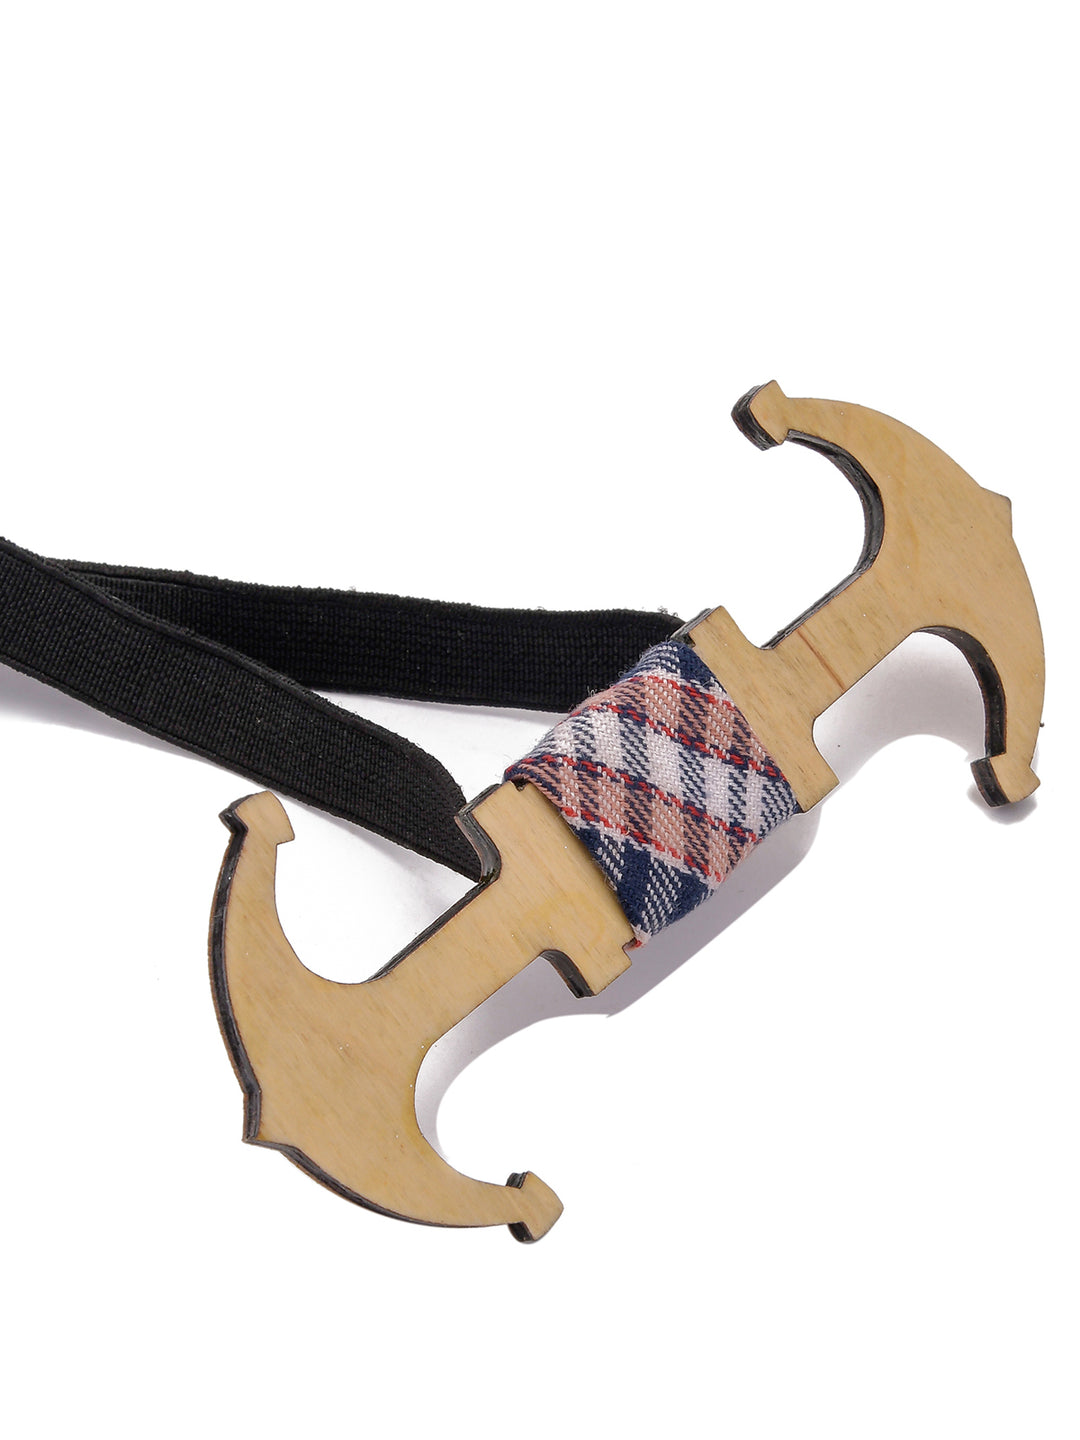 Anchor Wooden Bow Tie